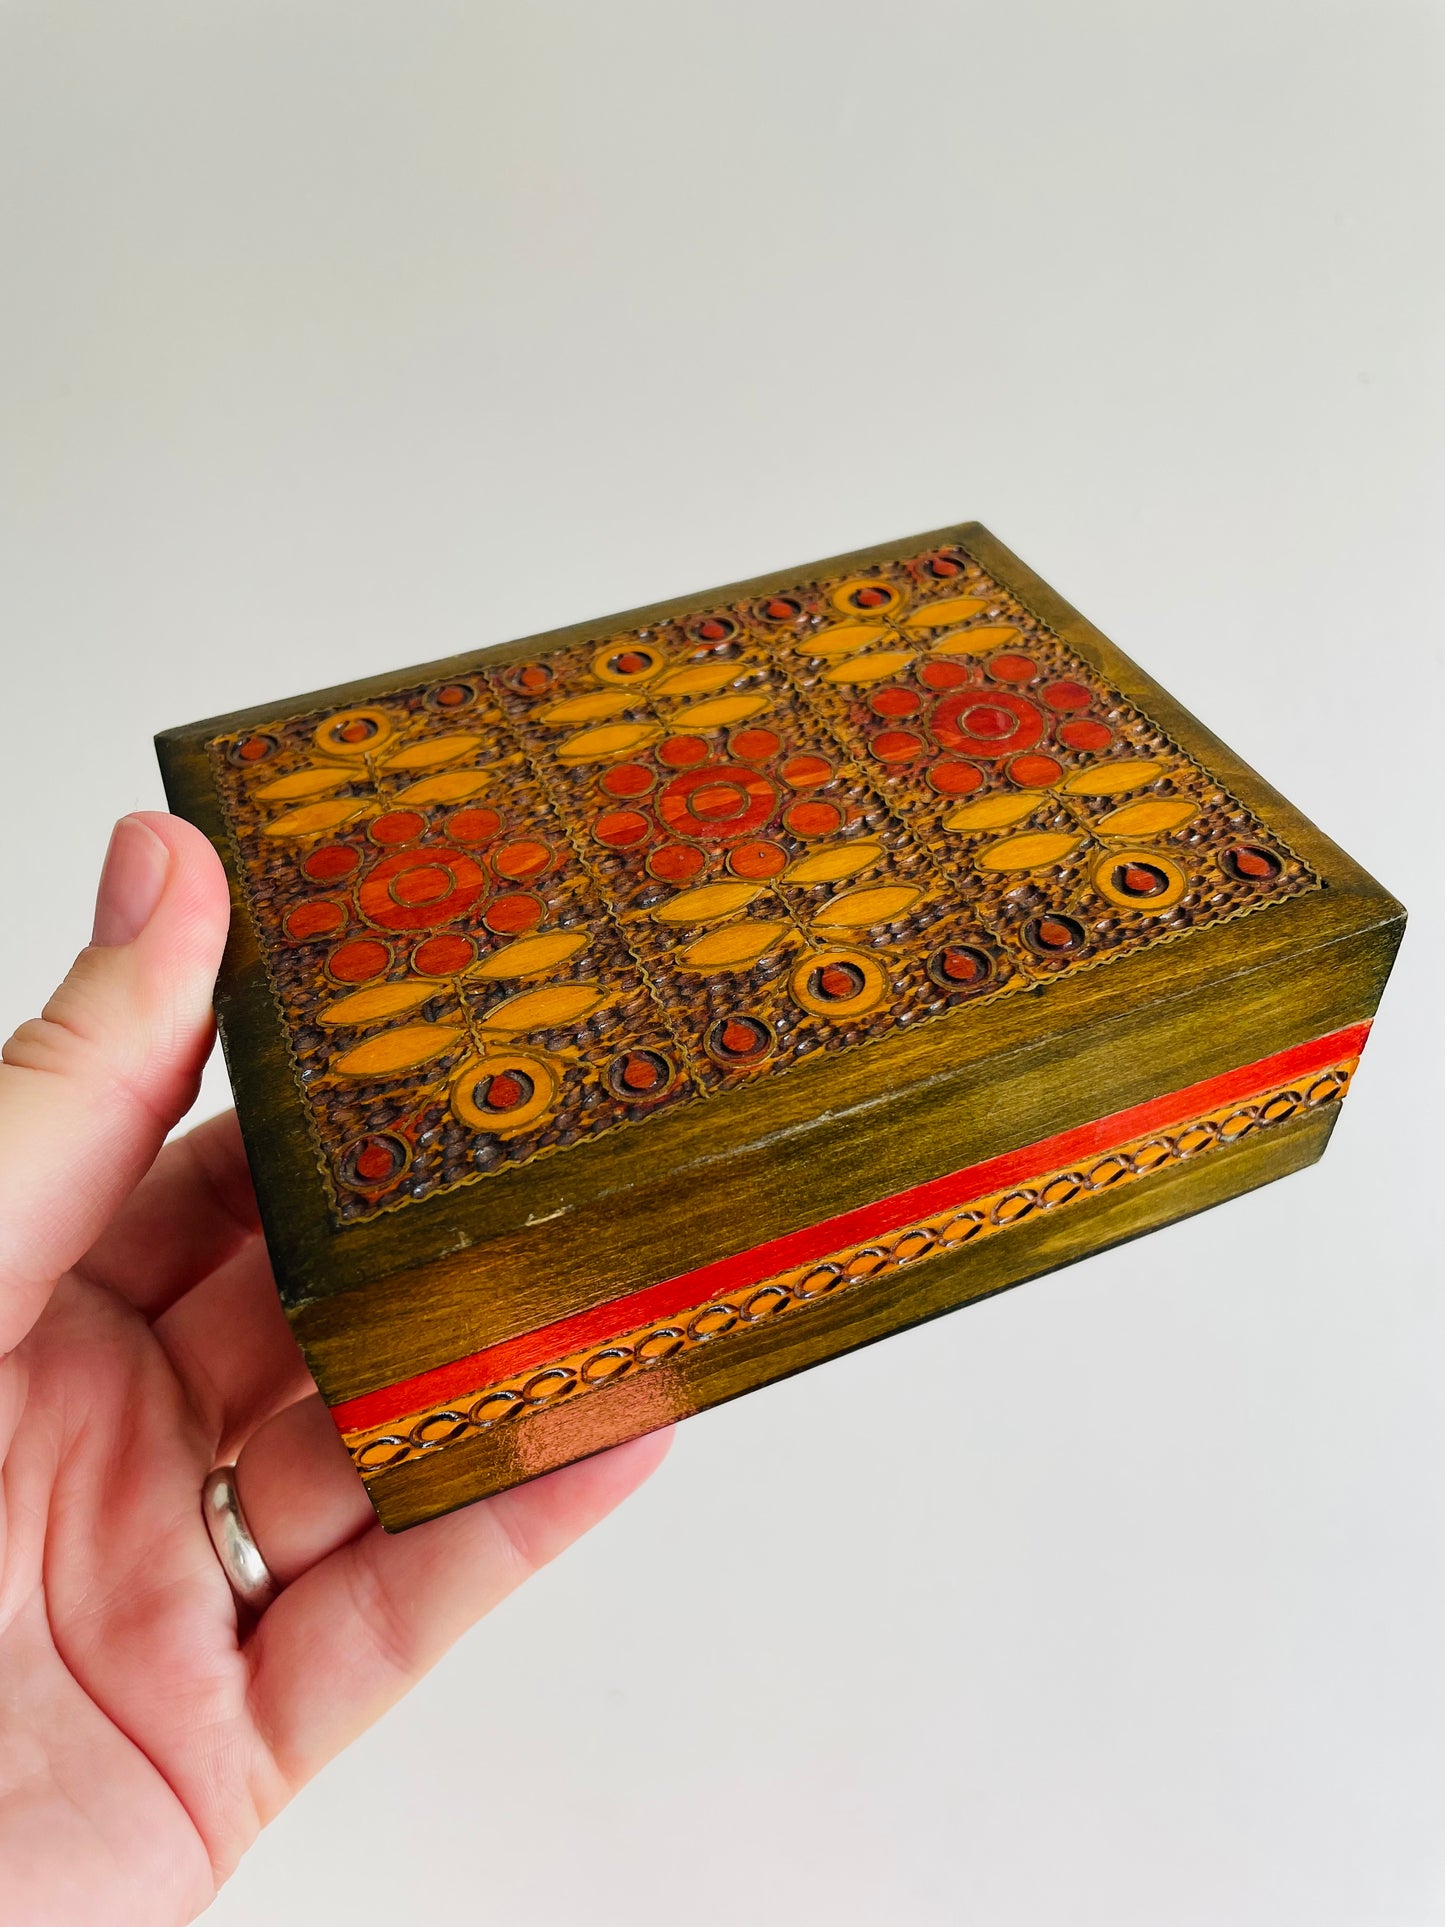 Carved Wood Trinket Box with Hinged Lid & Floral Design - Made in Poland - Great for Holding Card Decks!